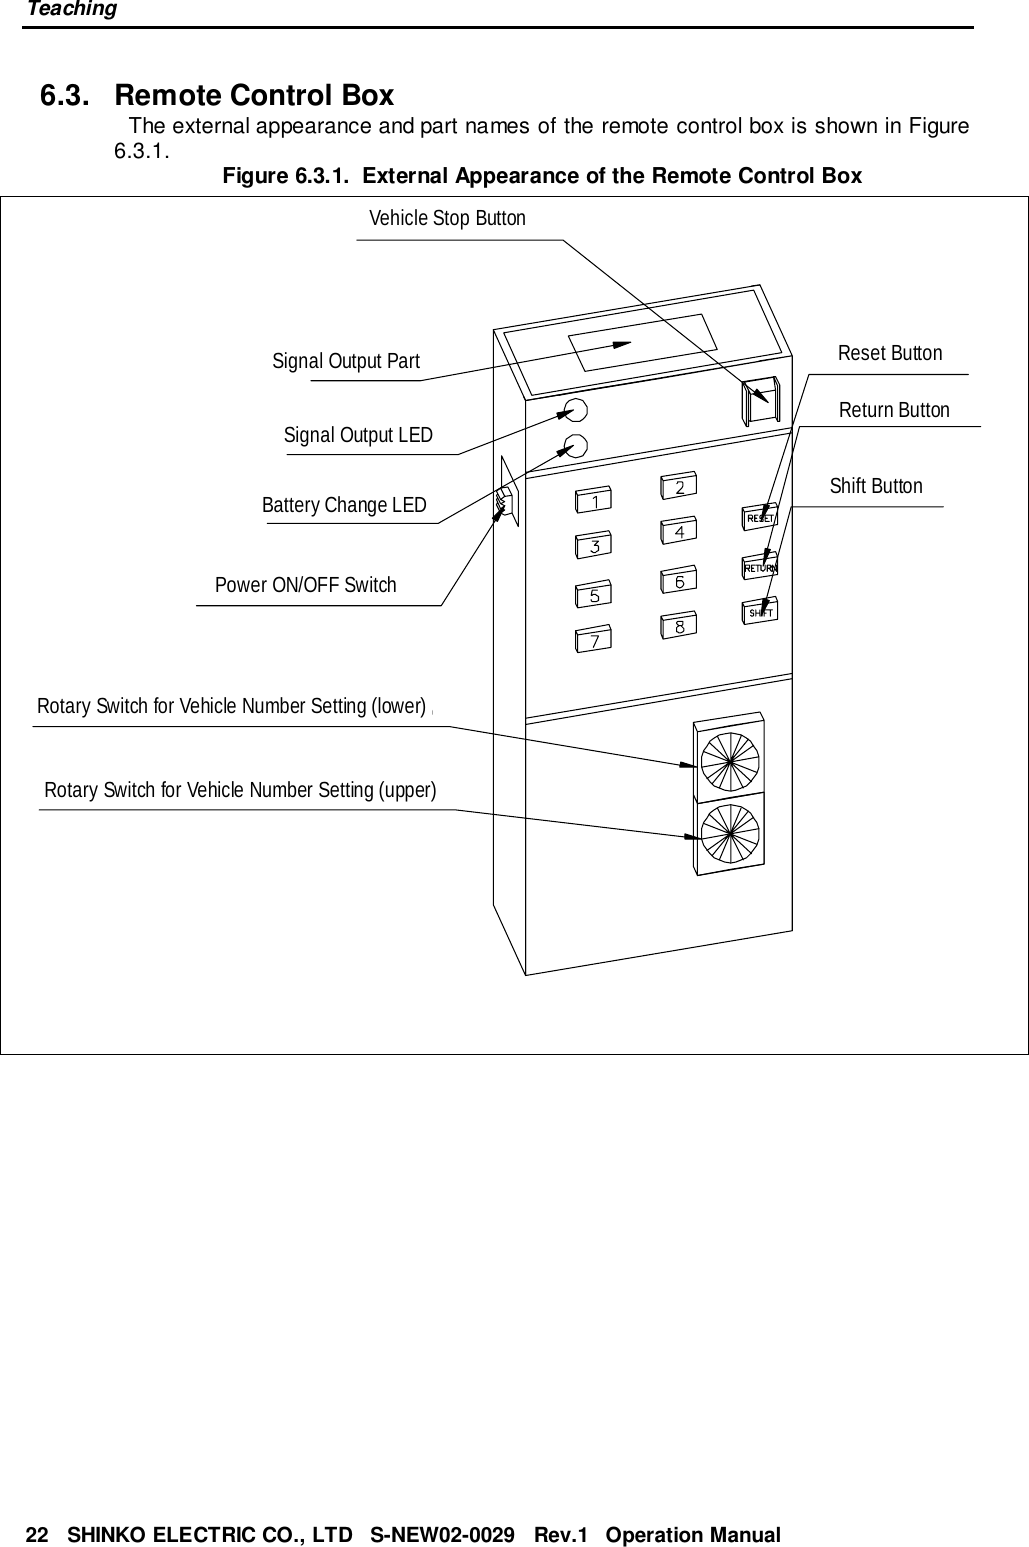 Teaching22   SHINKO ELECTRIC CO., LTD   S-NEW02-0029   Rev.1   Operation Manual6.3.  Remote Control BoxThe external appearance and part names of the remote control box is shown in Figure6.3.1. Figure 6.3.1.  External Appearance of the Remote Control BoxVehicle Stop ButtonSignal Output PartSignal Output LEDBattery Change LEDPower ON/OFF SwitchRotary Switch for Vehicle Number Setting (lower)Rotary Switch for Vehicle Number Setting (upper)Reset ButtonReturn ButtonShift Button